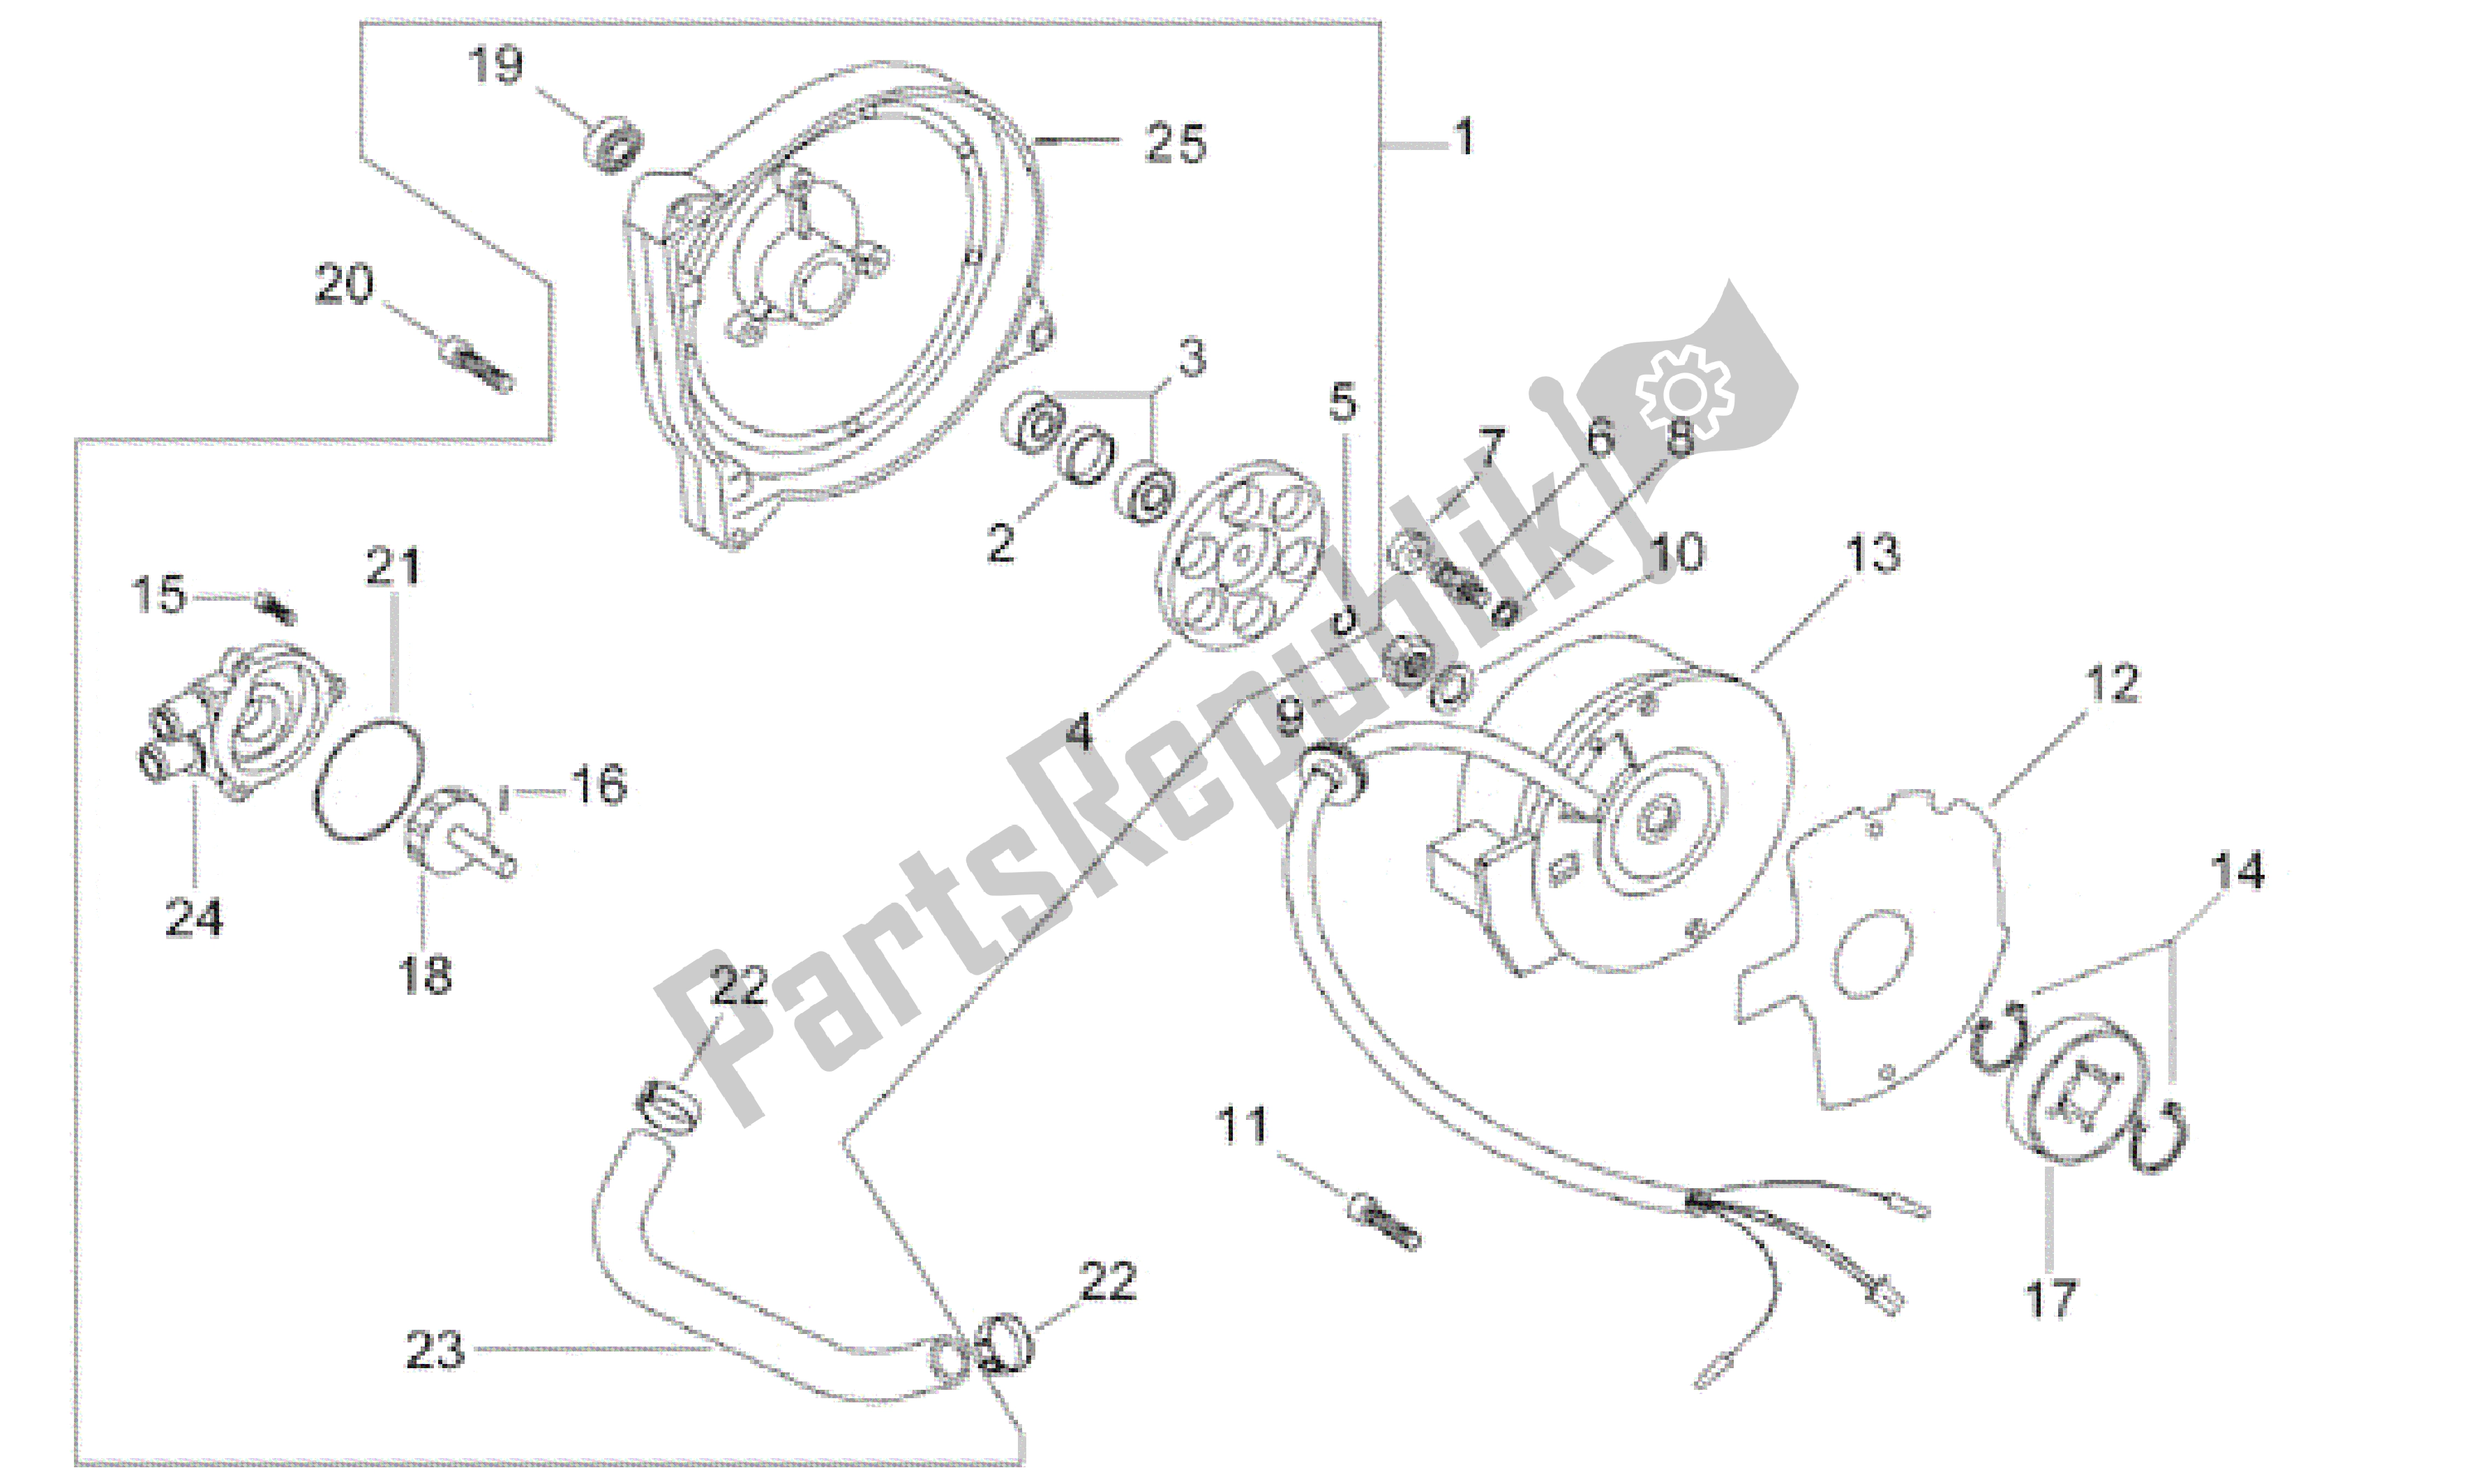 All parts for the Flywheel - Water Pump of the Aprilia SR WWW 50 1997 - 1999